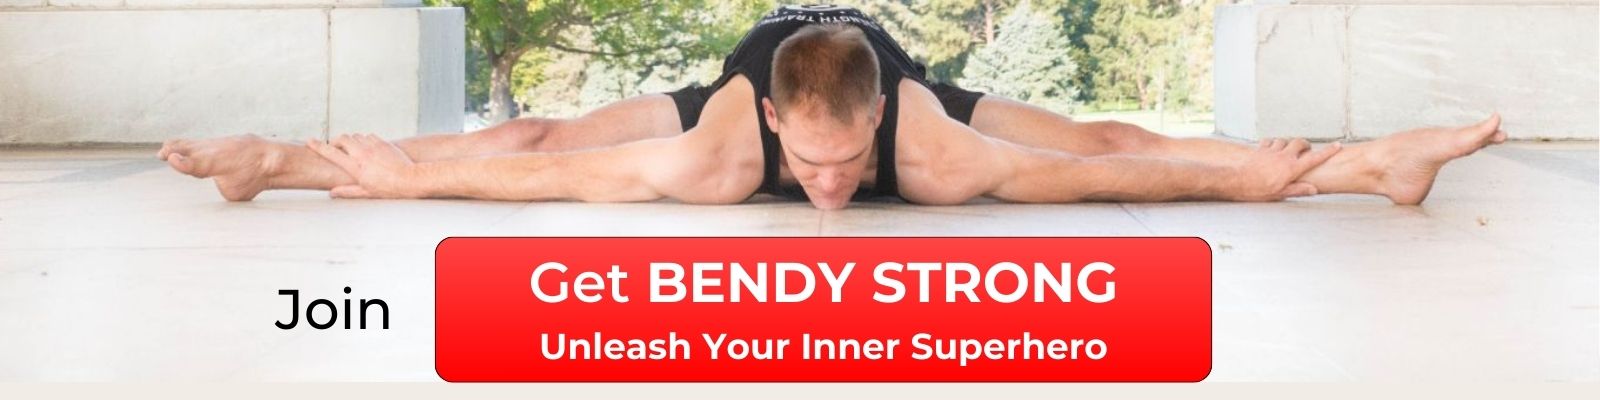 Join Get Bendy Strong